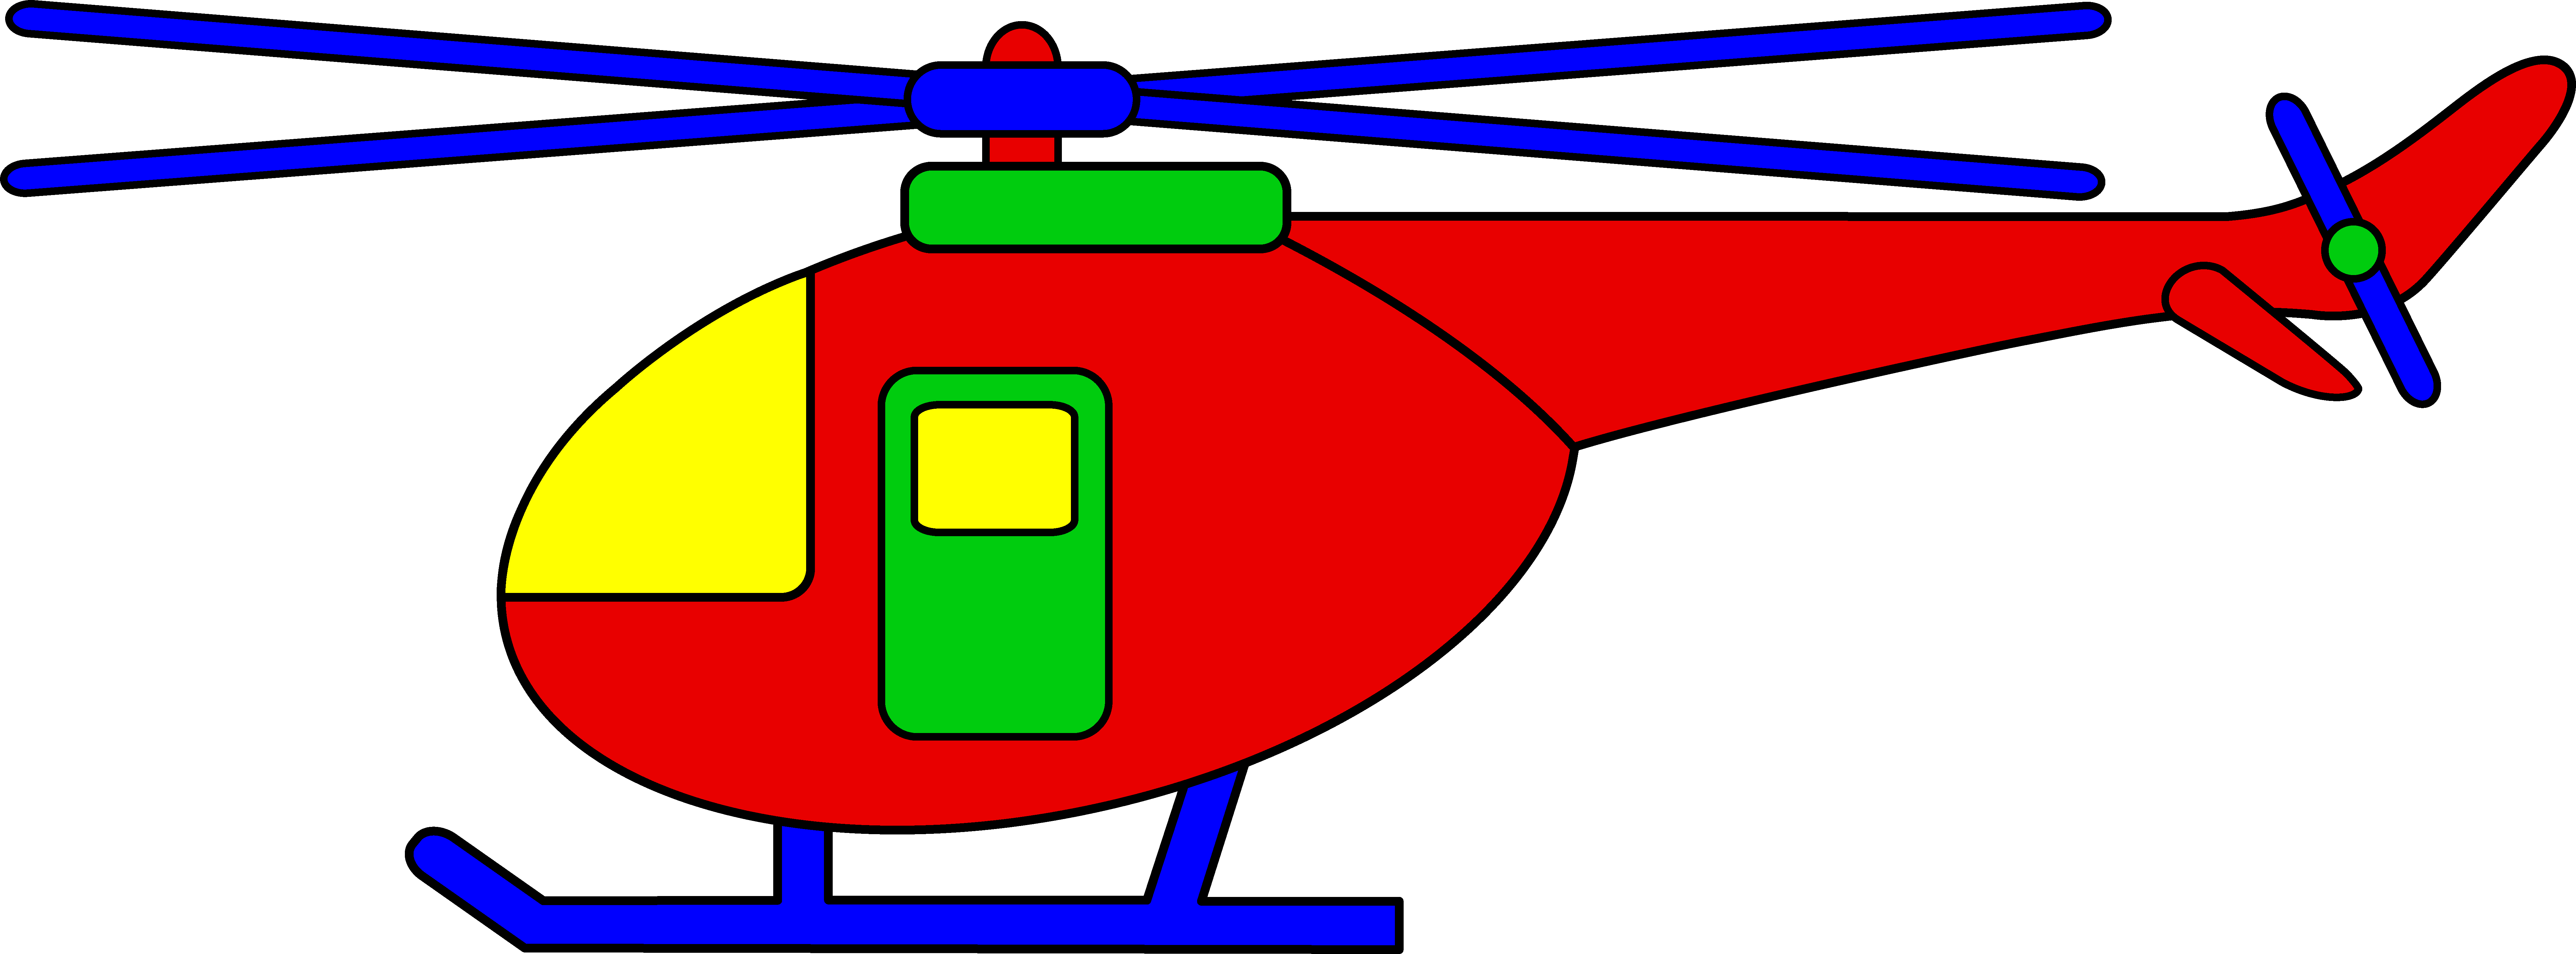 Helicopter - csp5279495